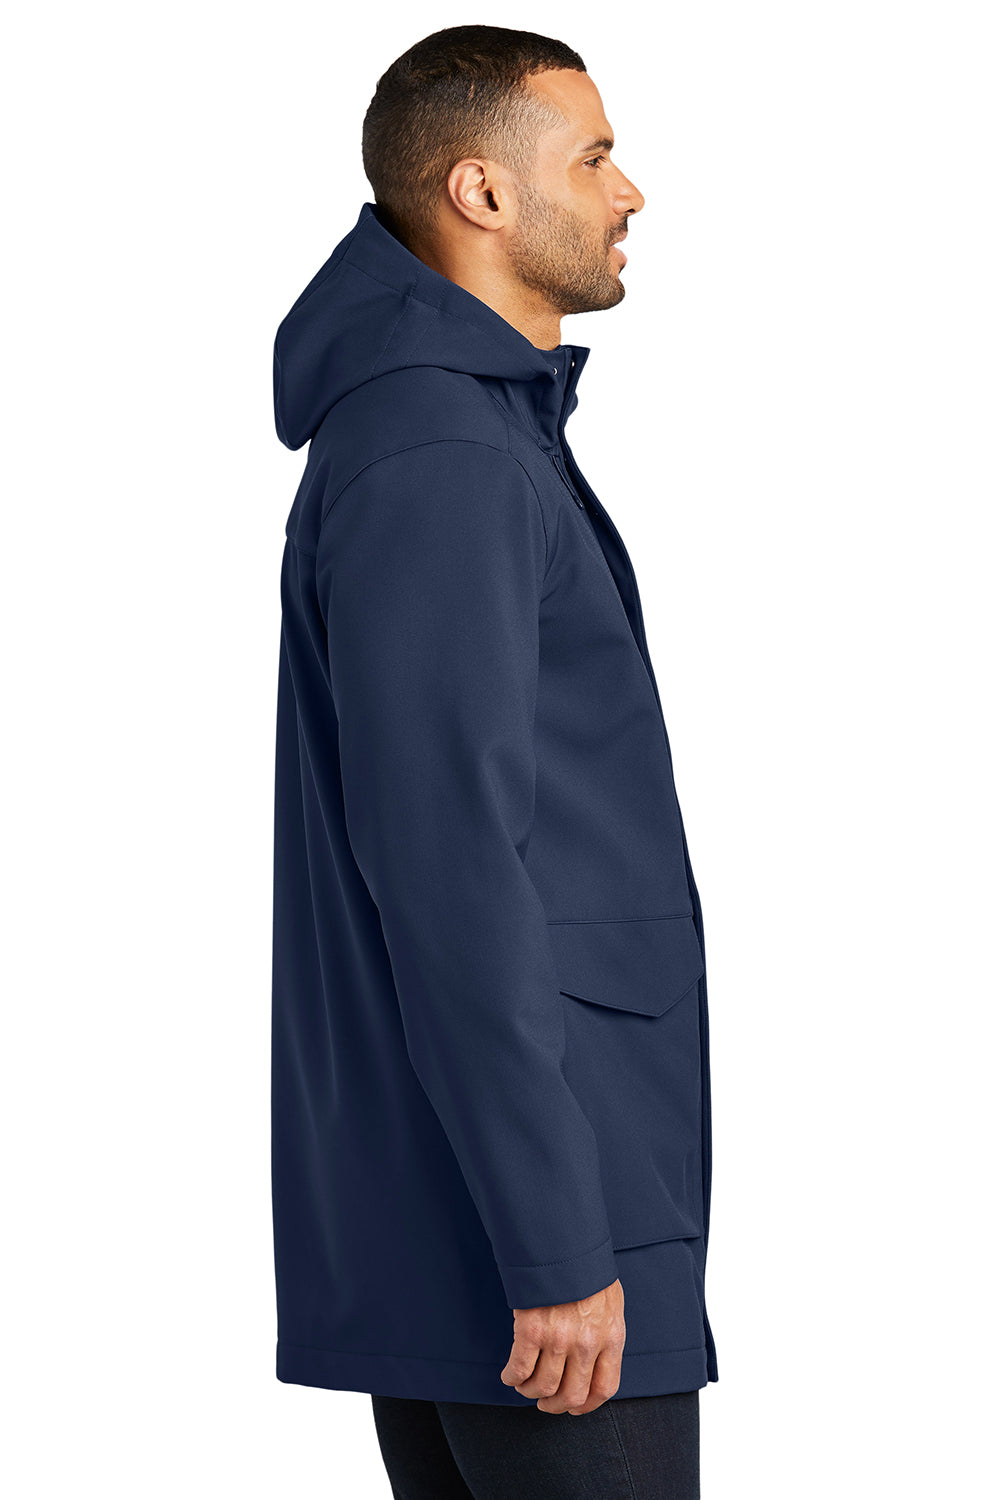 Port Authority J919 Mens Collective Full Zip Hooded Parka River Navy Blue Side